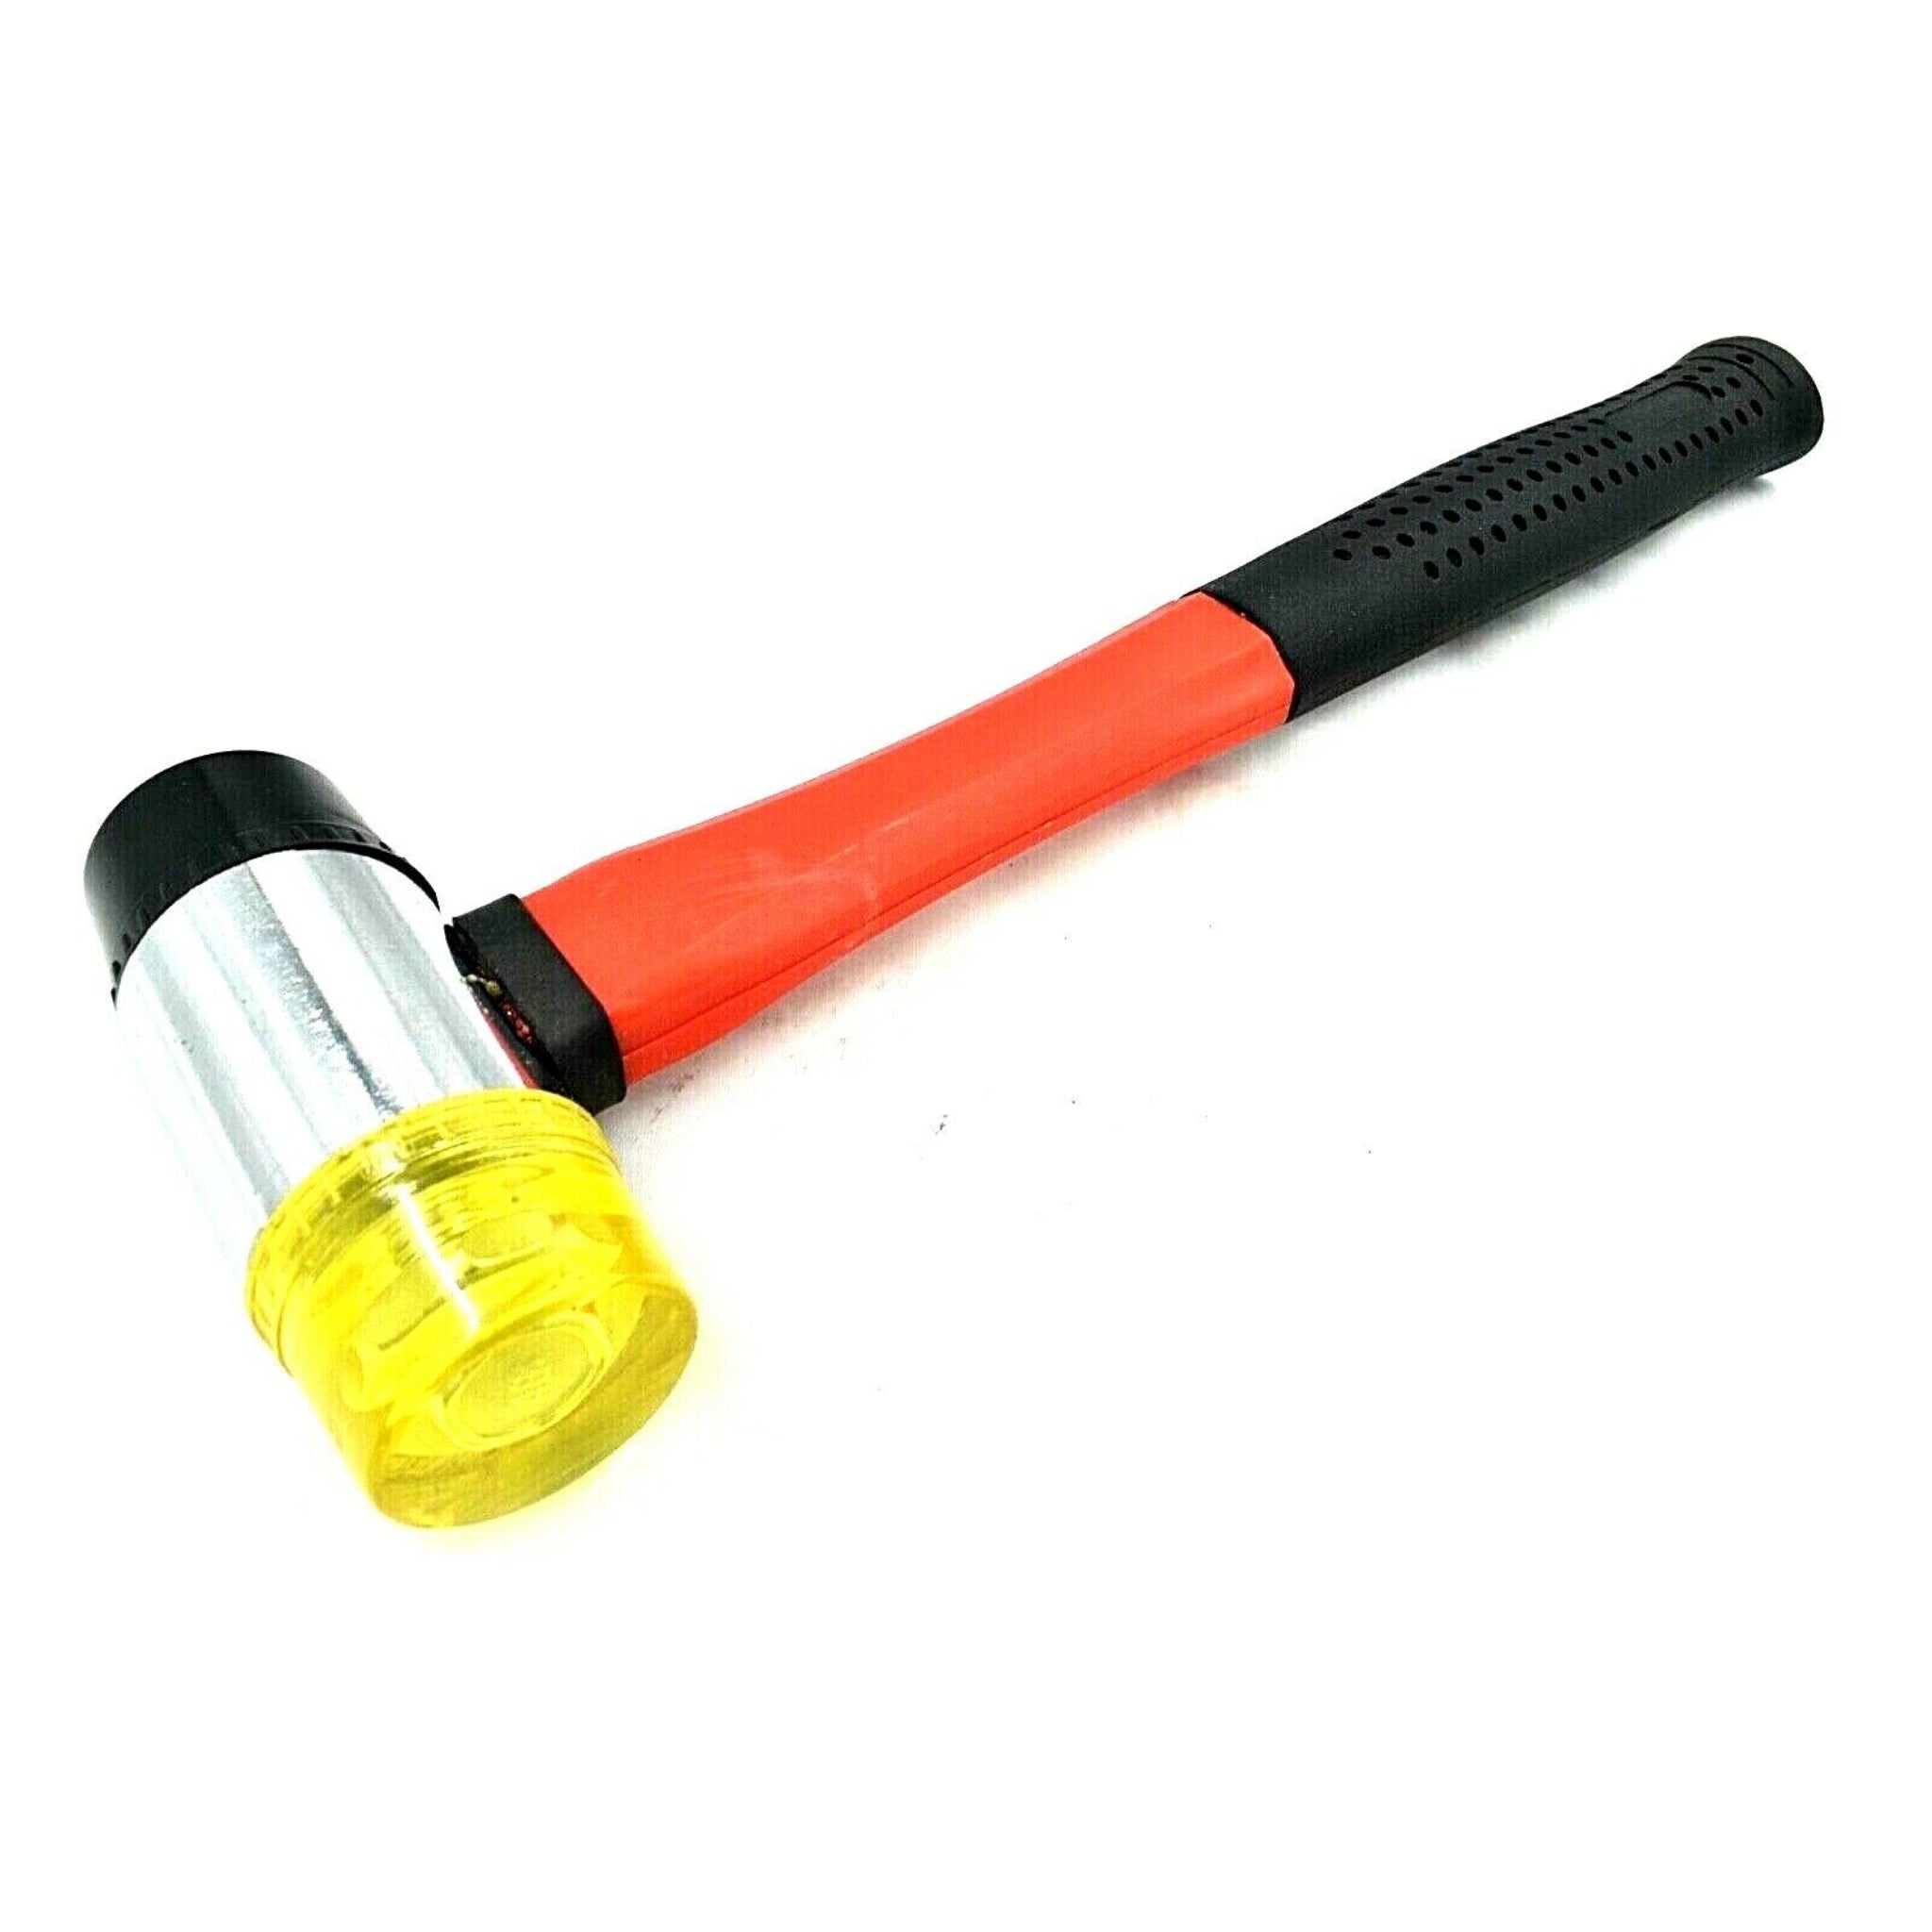 Beclen Harp 40mm Double Faced Nylon Head Rubber Hammer-Perfect Mallet Tool For Tile/Window/Glazing